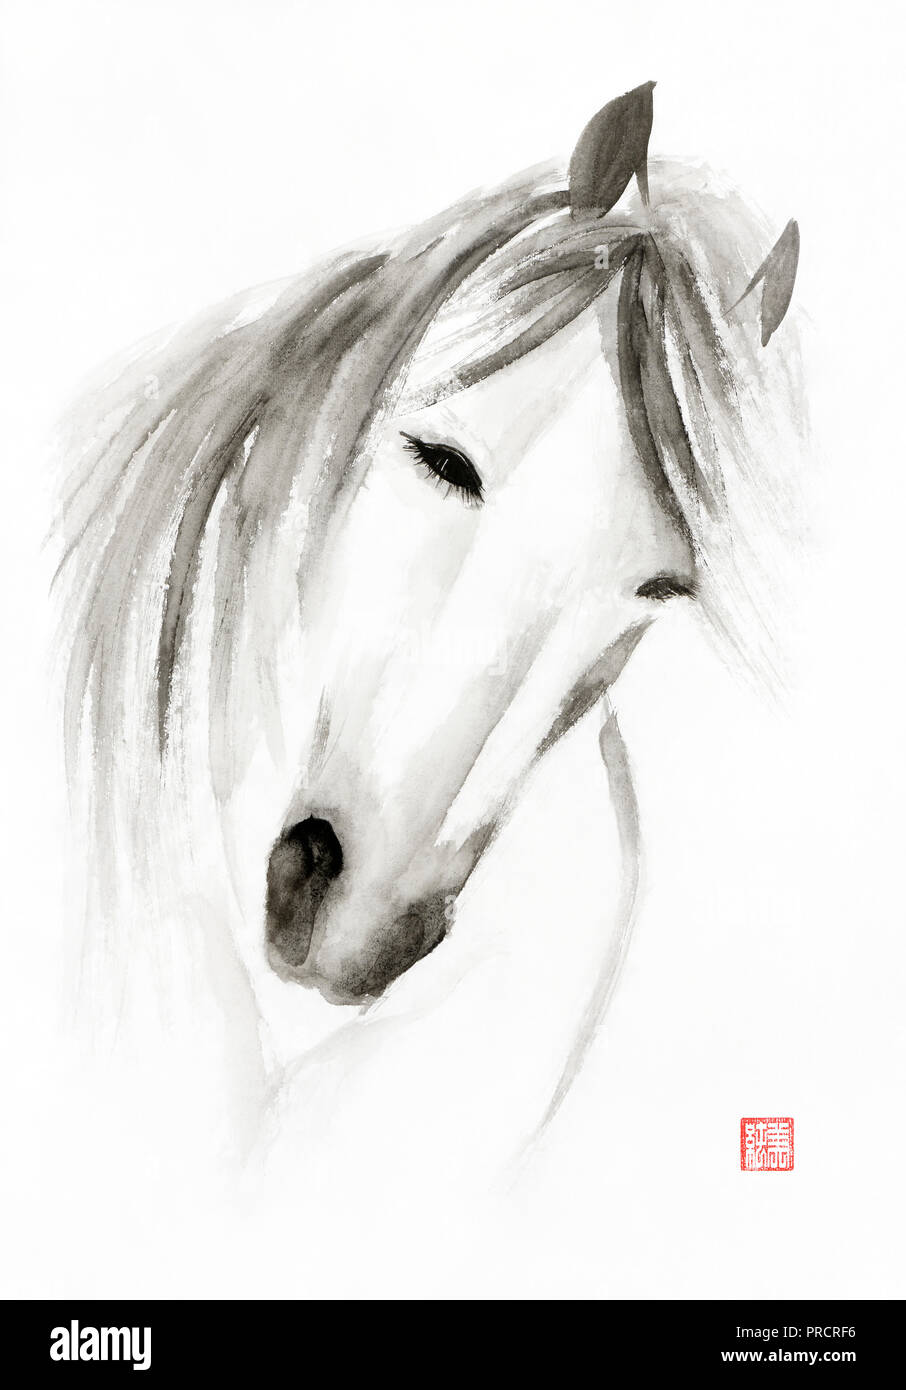 Wild white horse face with grey mane, abstract minimalistic portrait. Japanese Zen Sumi-e black ink painting on white rice paper background. Stock Photo